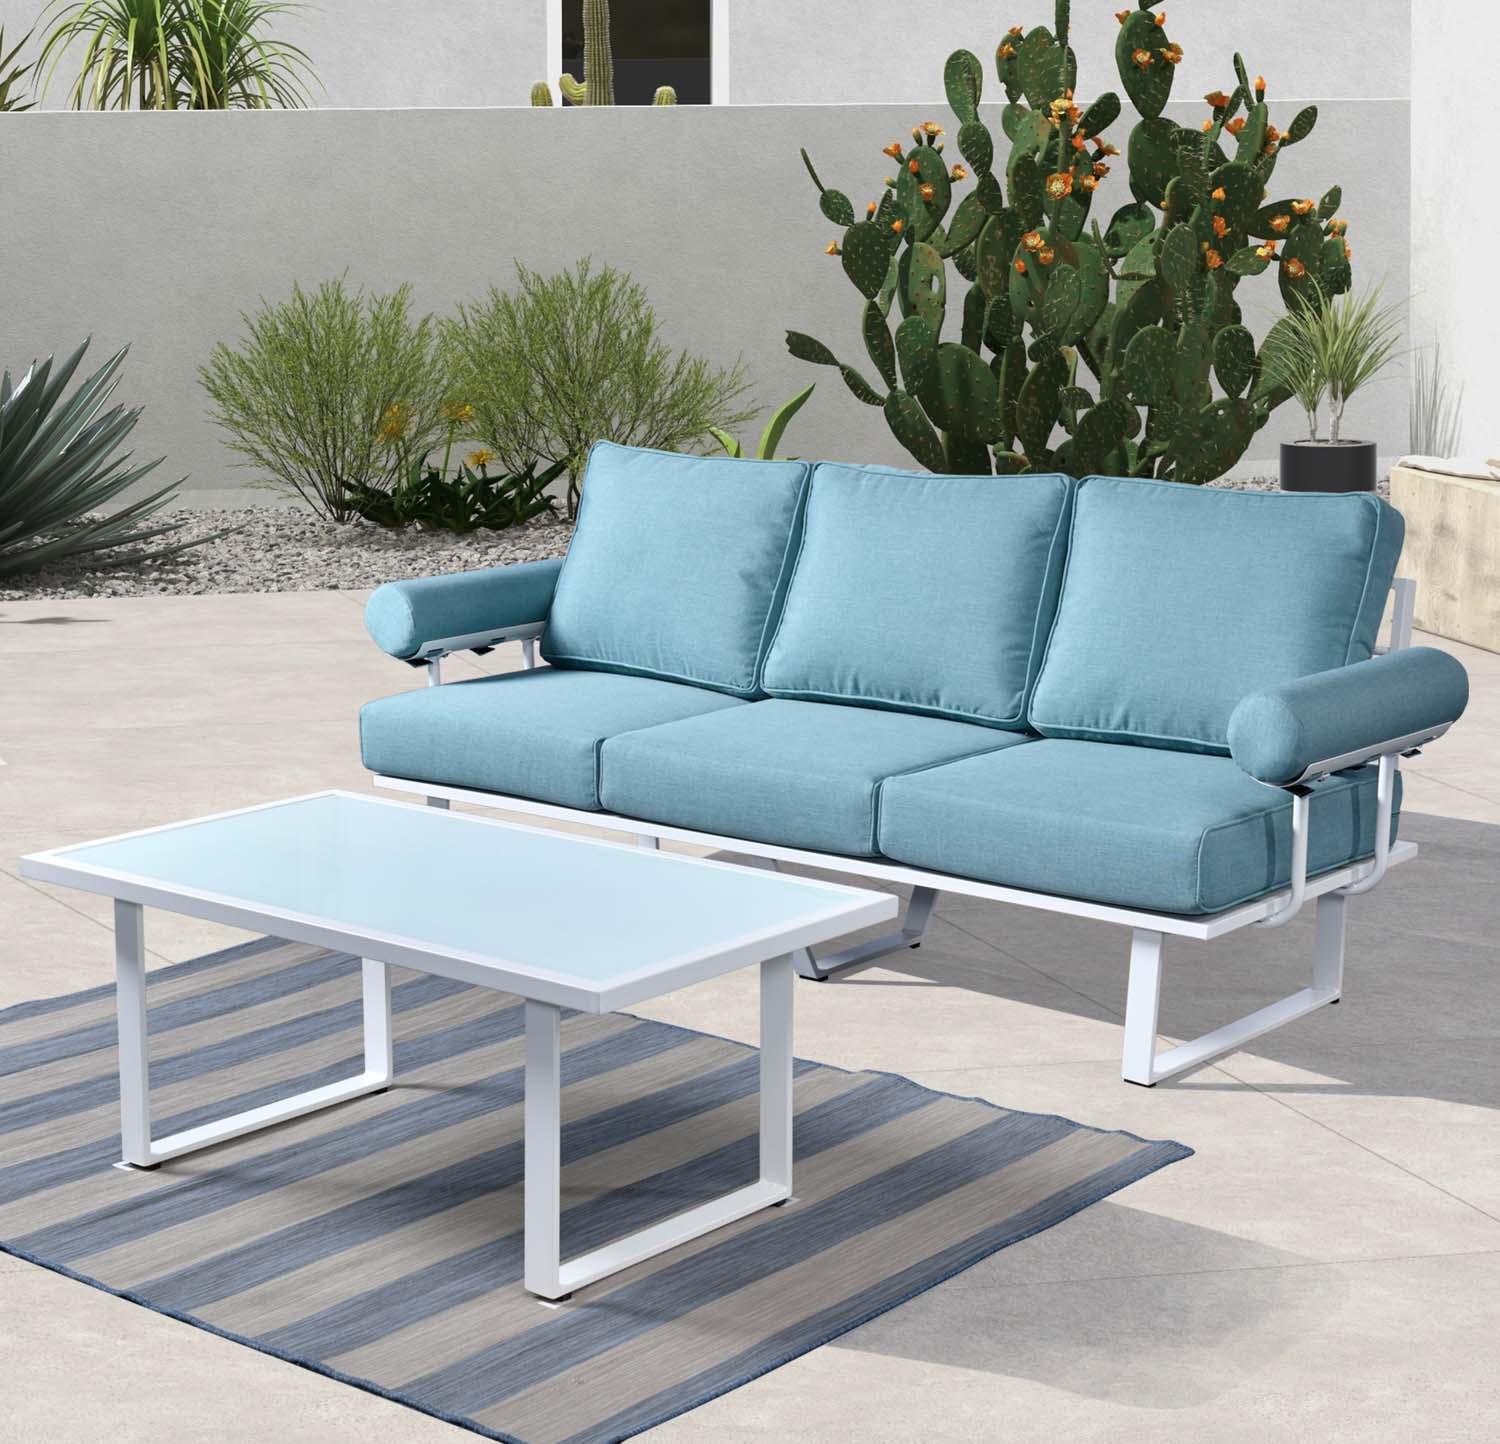 Ovios Patio Bistro Set Couch with Table, Aluminum Frame, 5'' Cushion